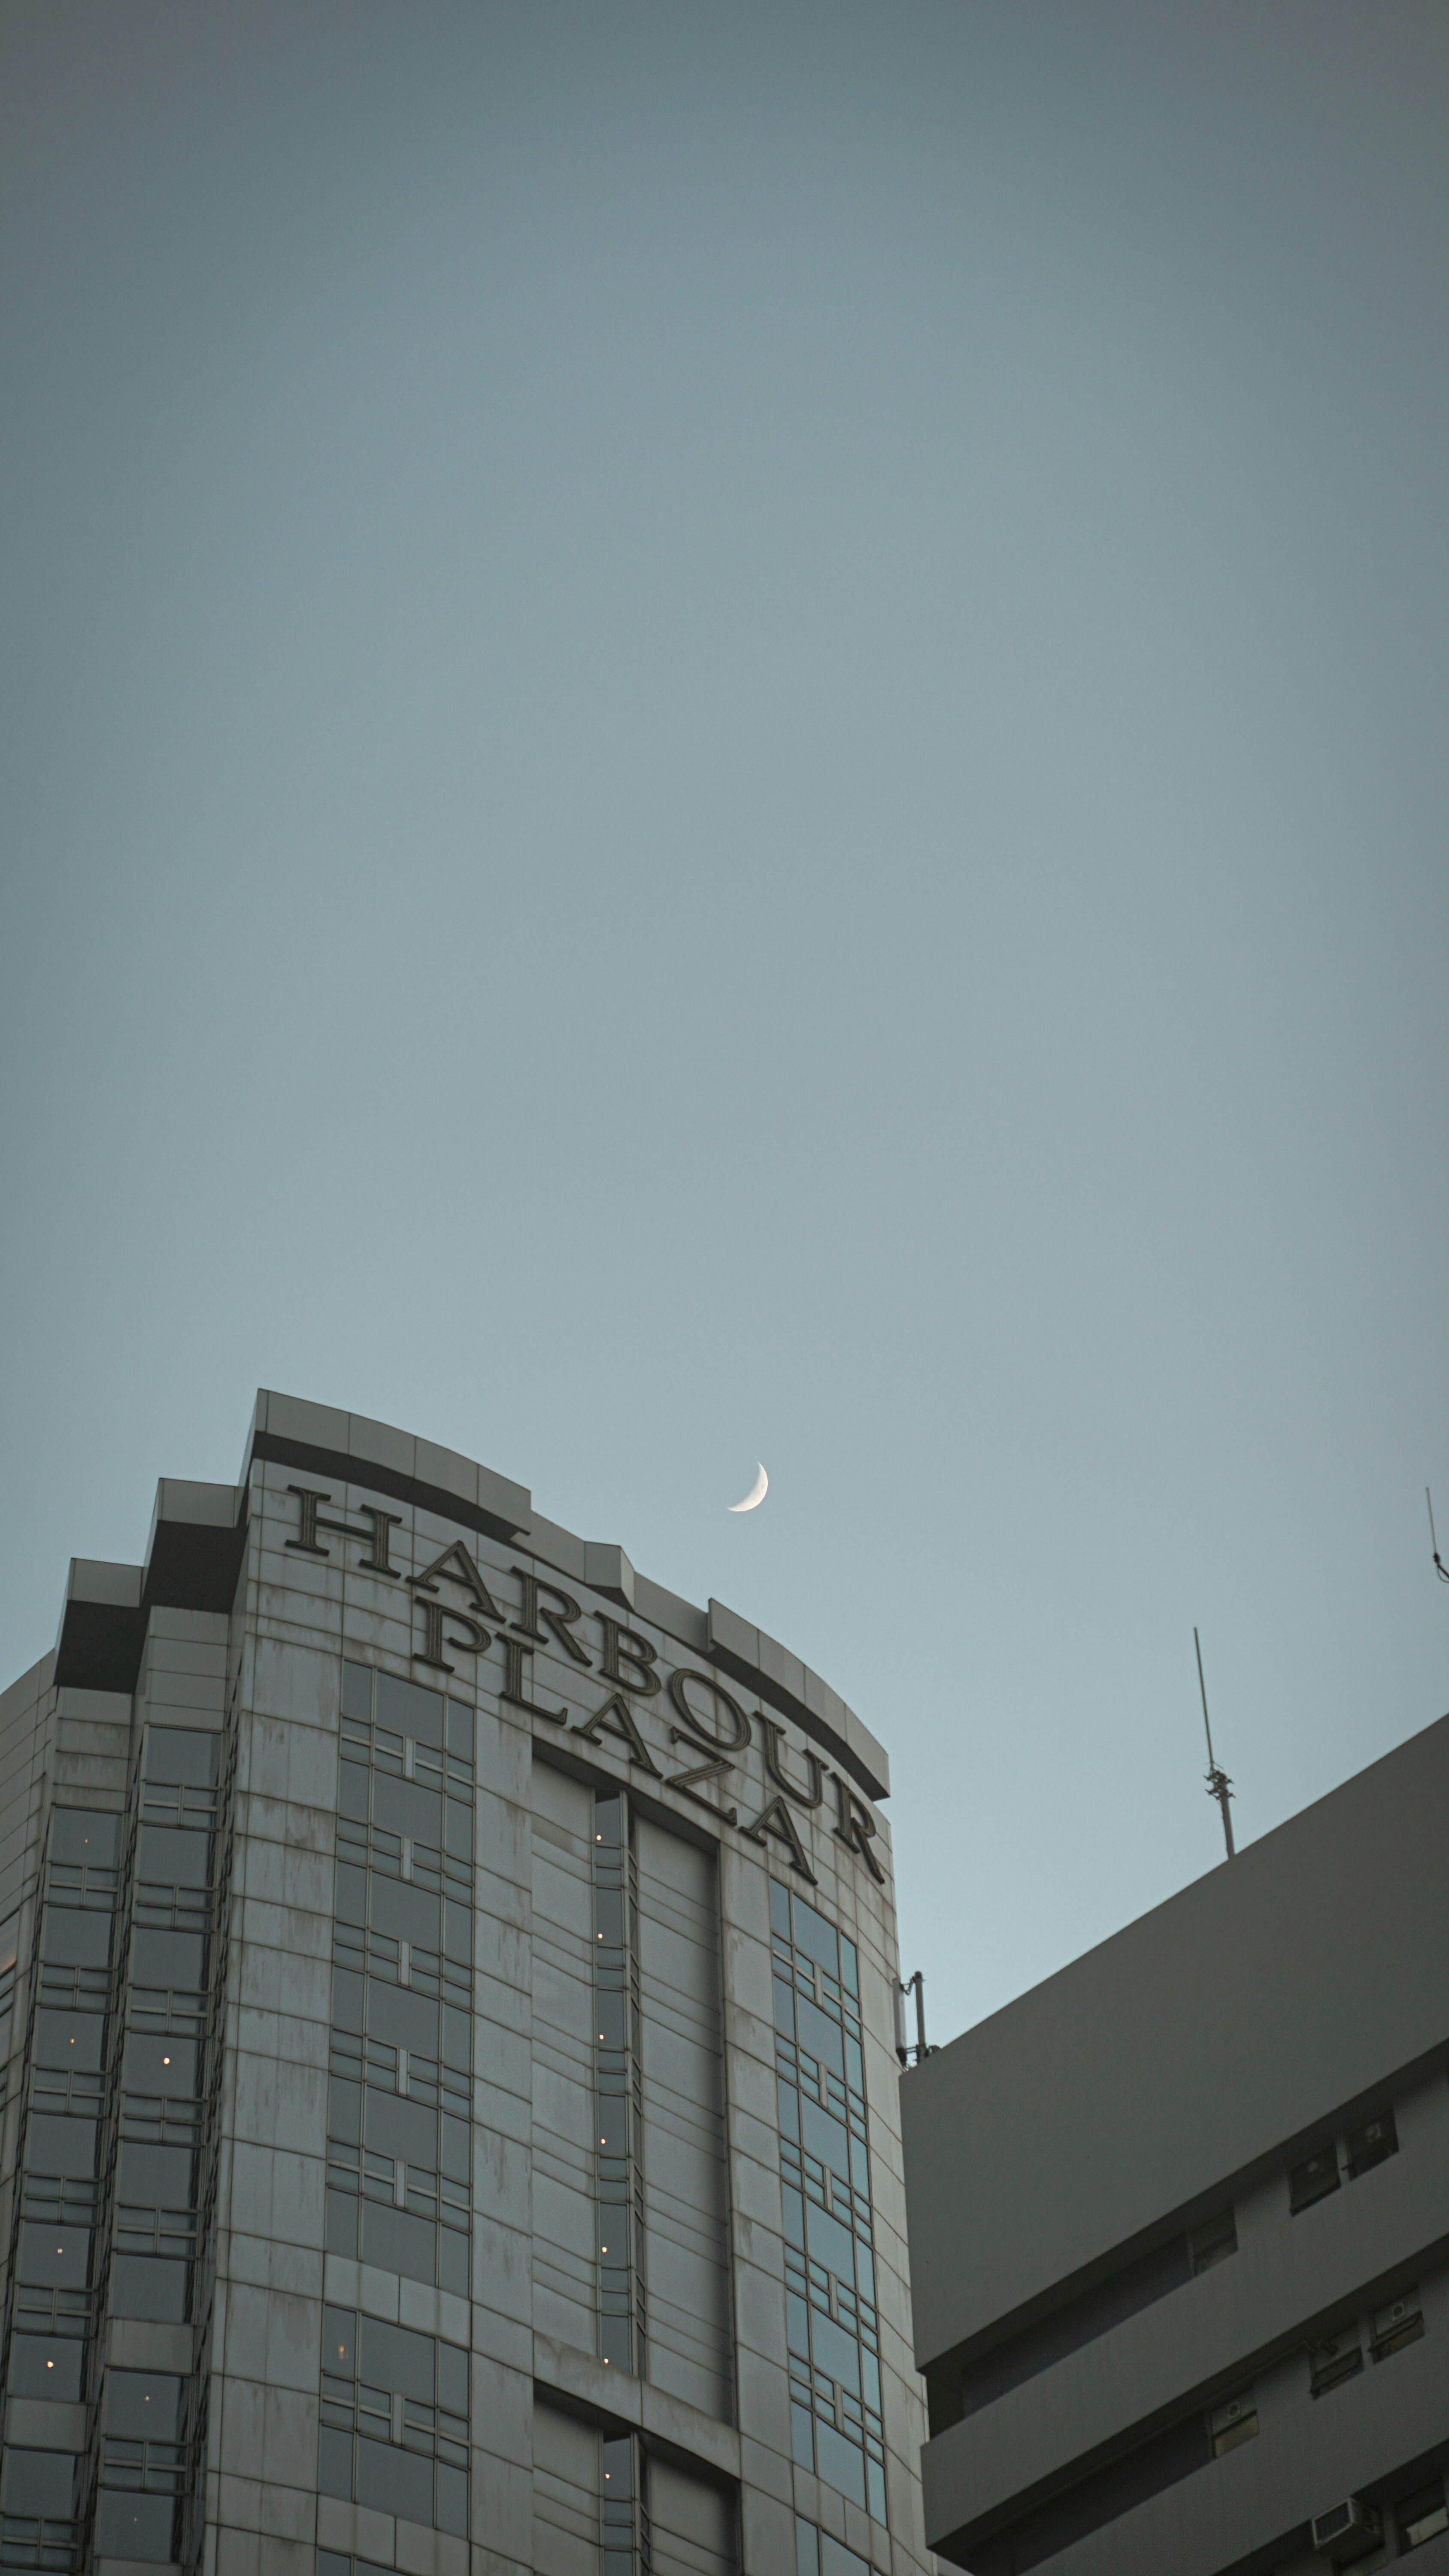 Moon crescent hanging over the Harbour Plaza